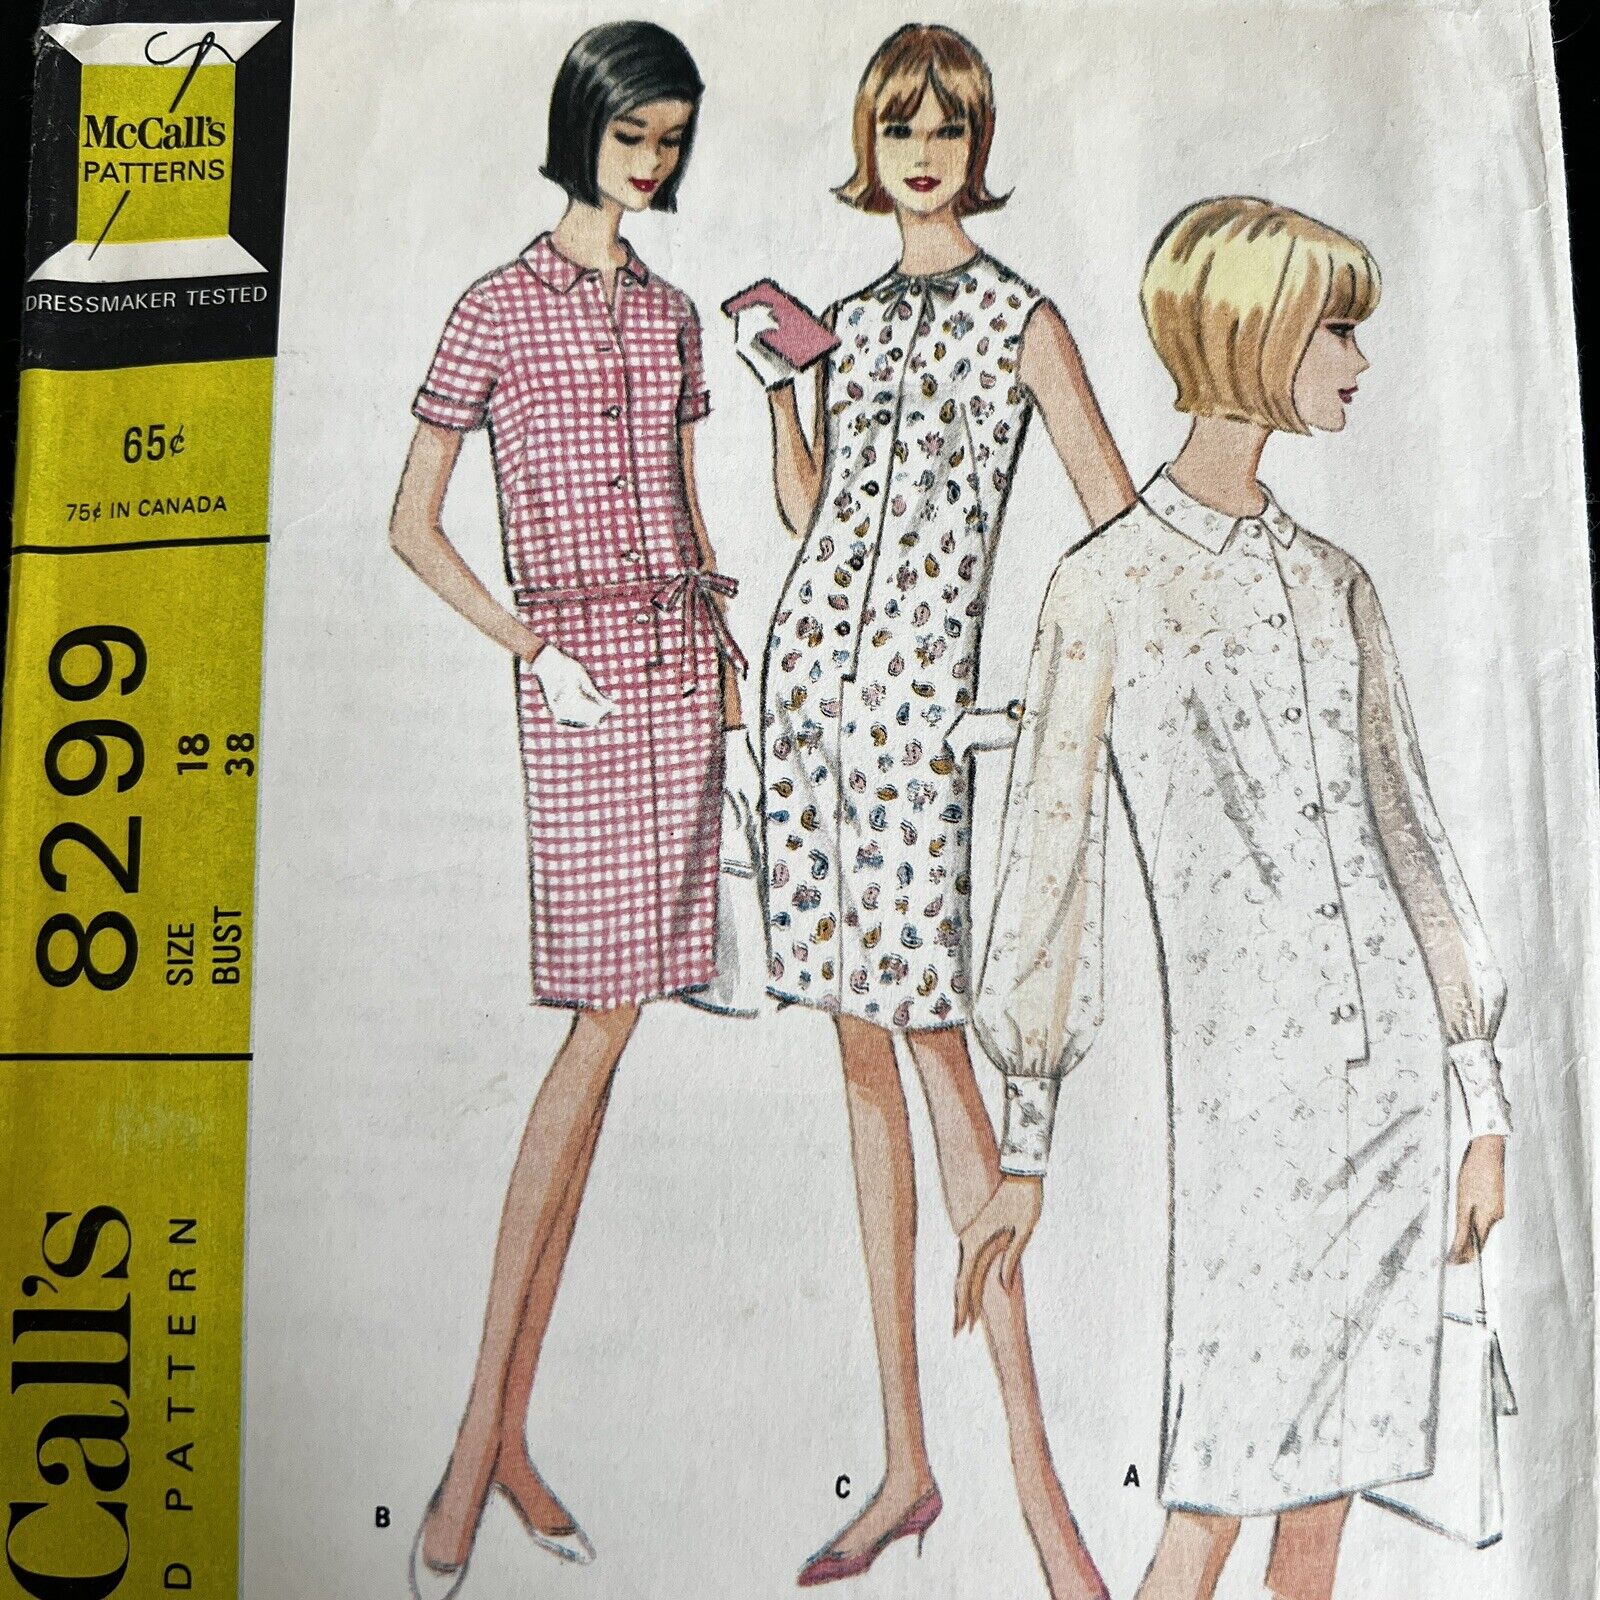 Vintage 1960s McCalls 8299 Slim Collared Button Dress Sewing Pattern 18 M/L CUT